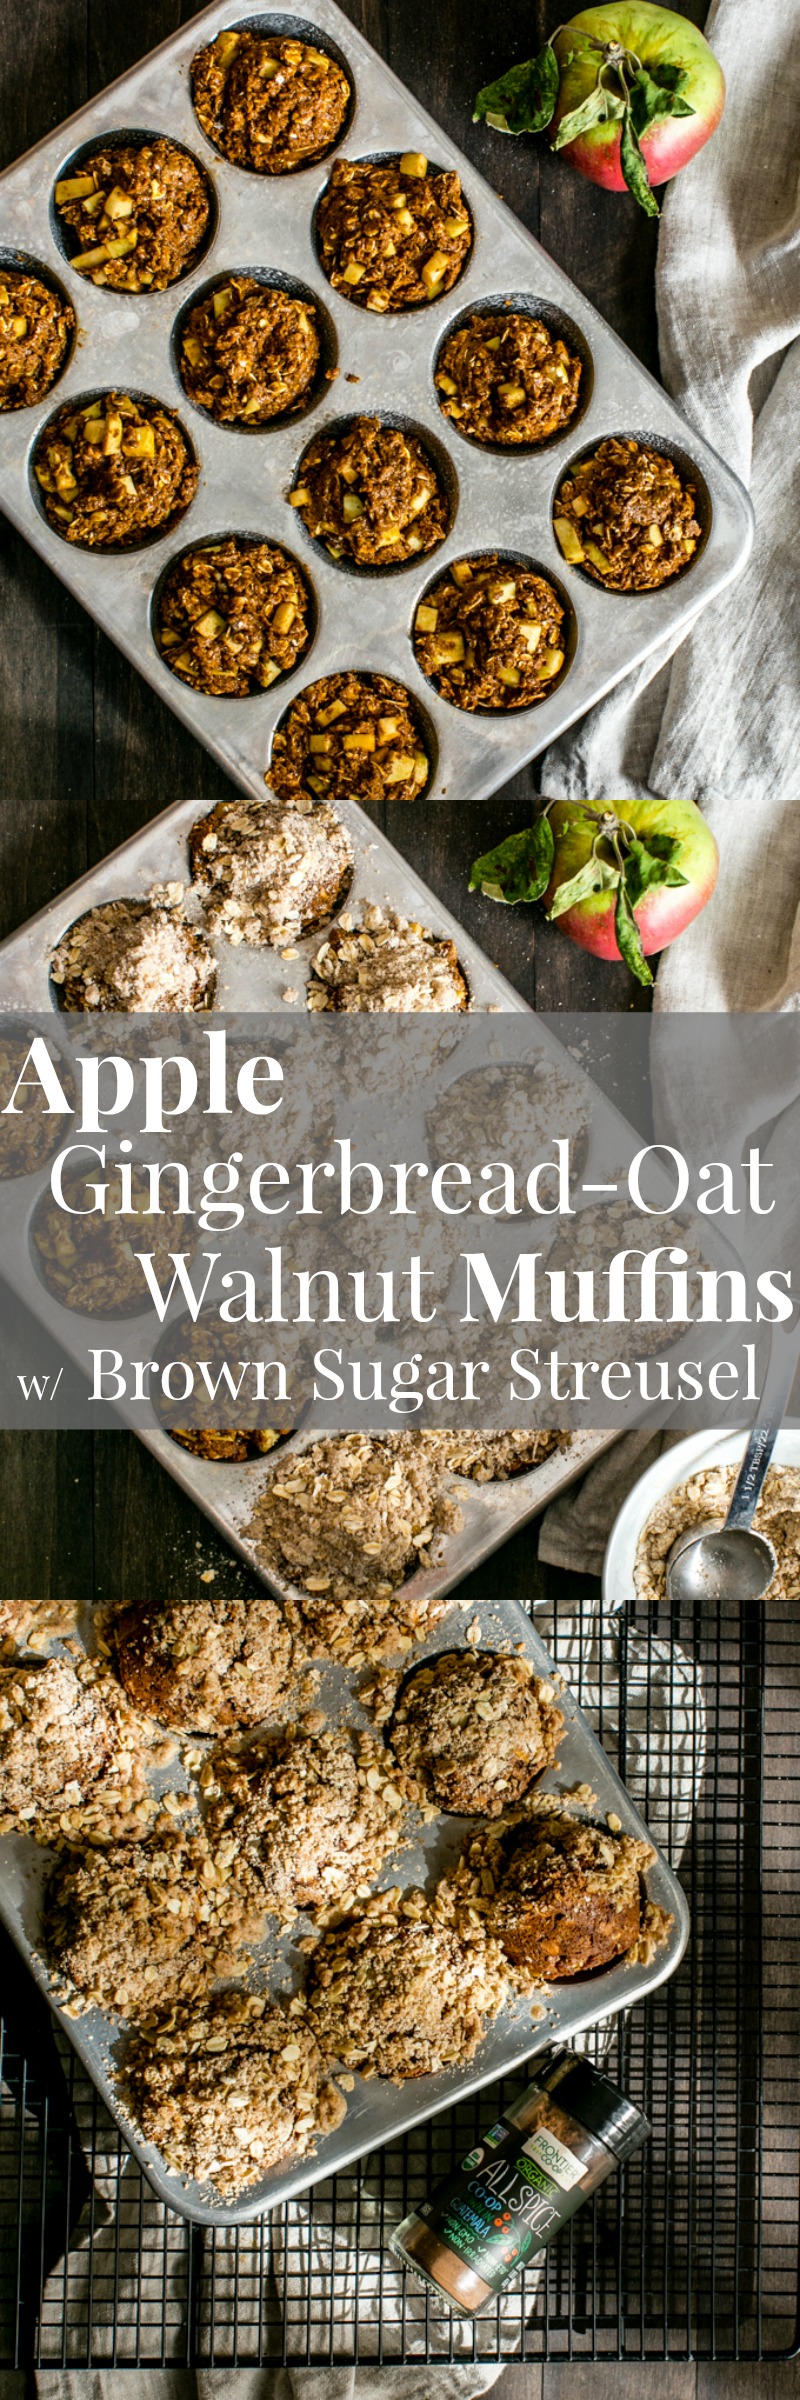 Warming and cozy Vegan Apple Gingerbread-Oat Walnut Muffins with Brown Sugar Streusel are easy to make and freezer friendly! Welcome fall! #ad